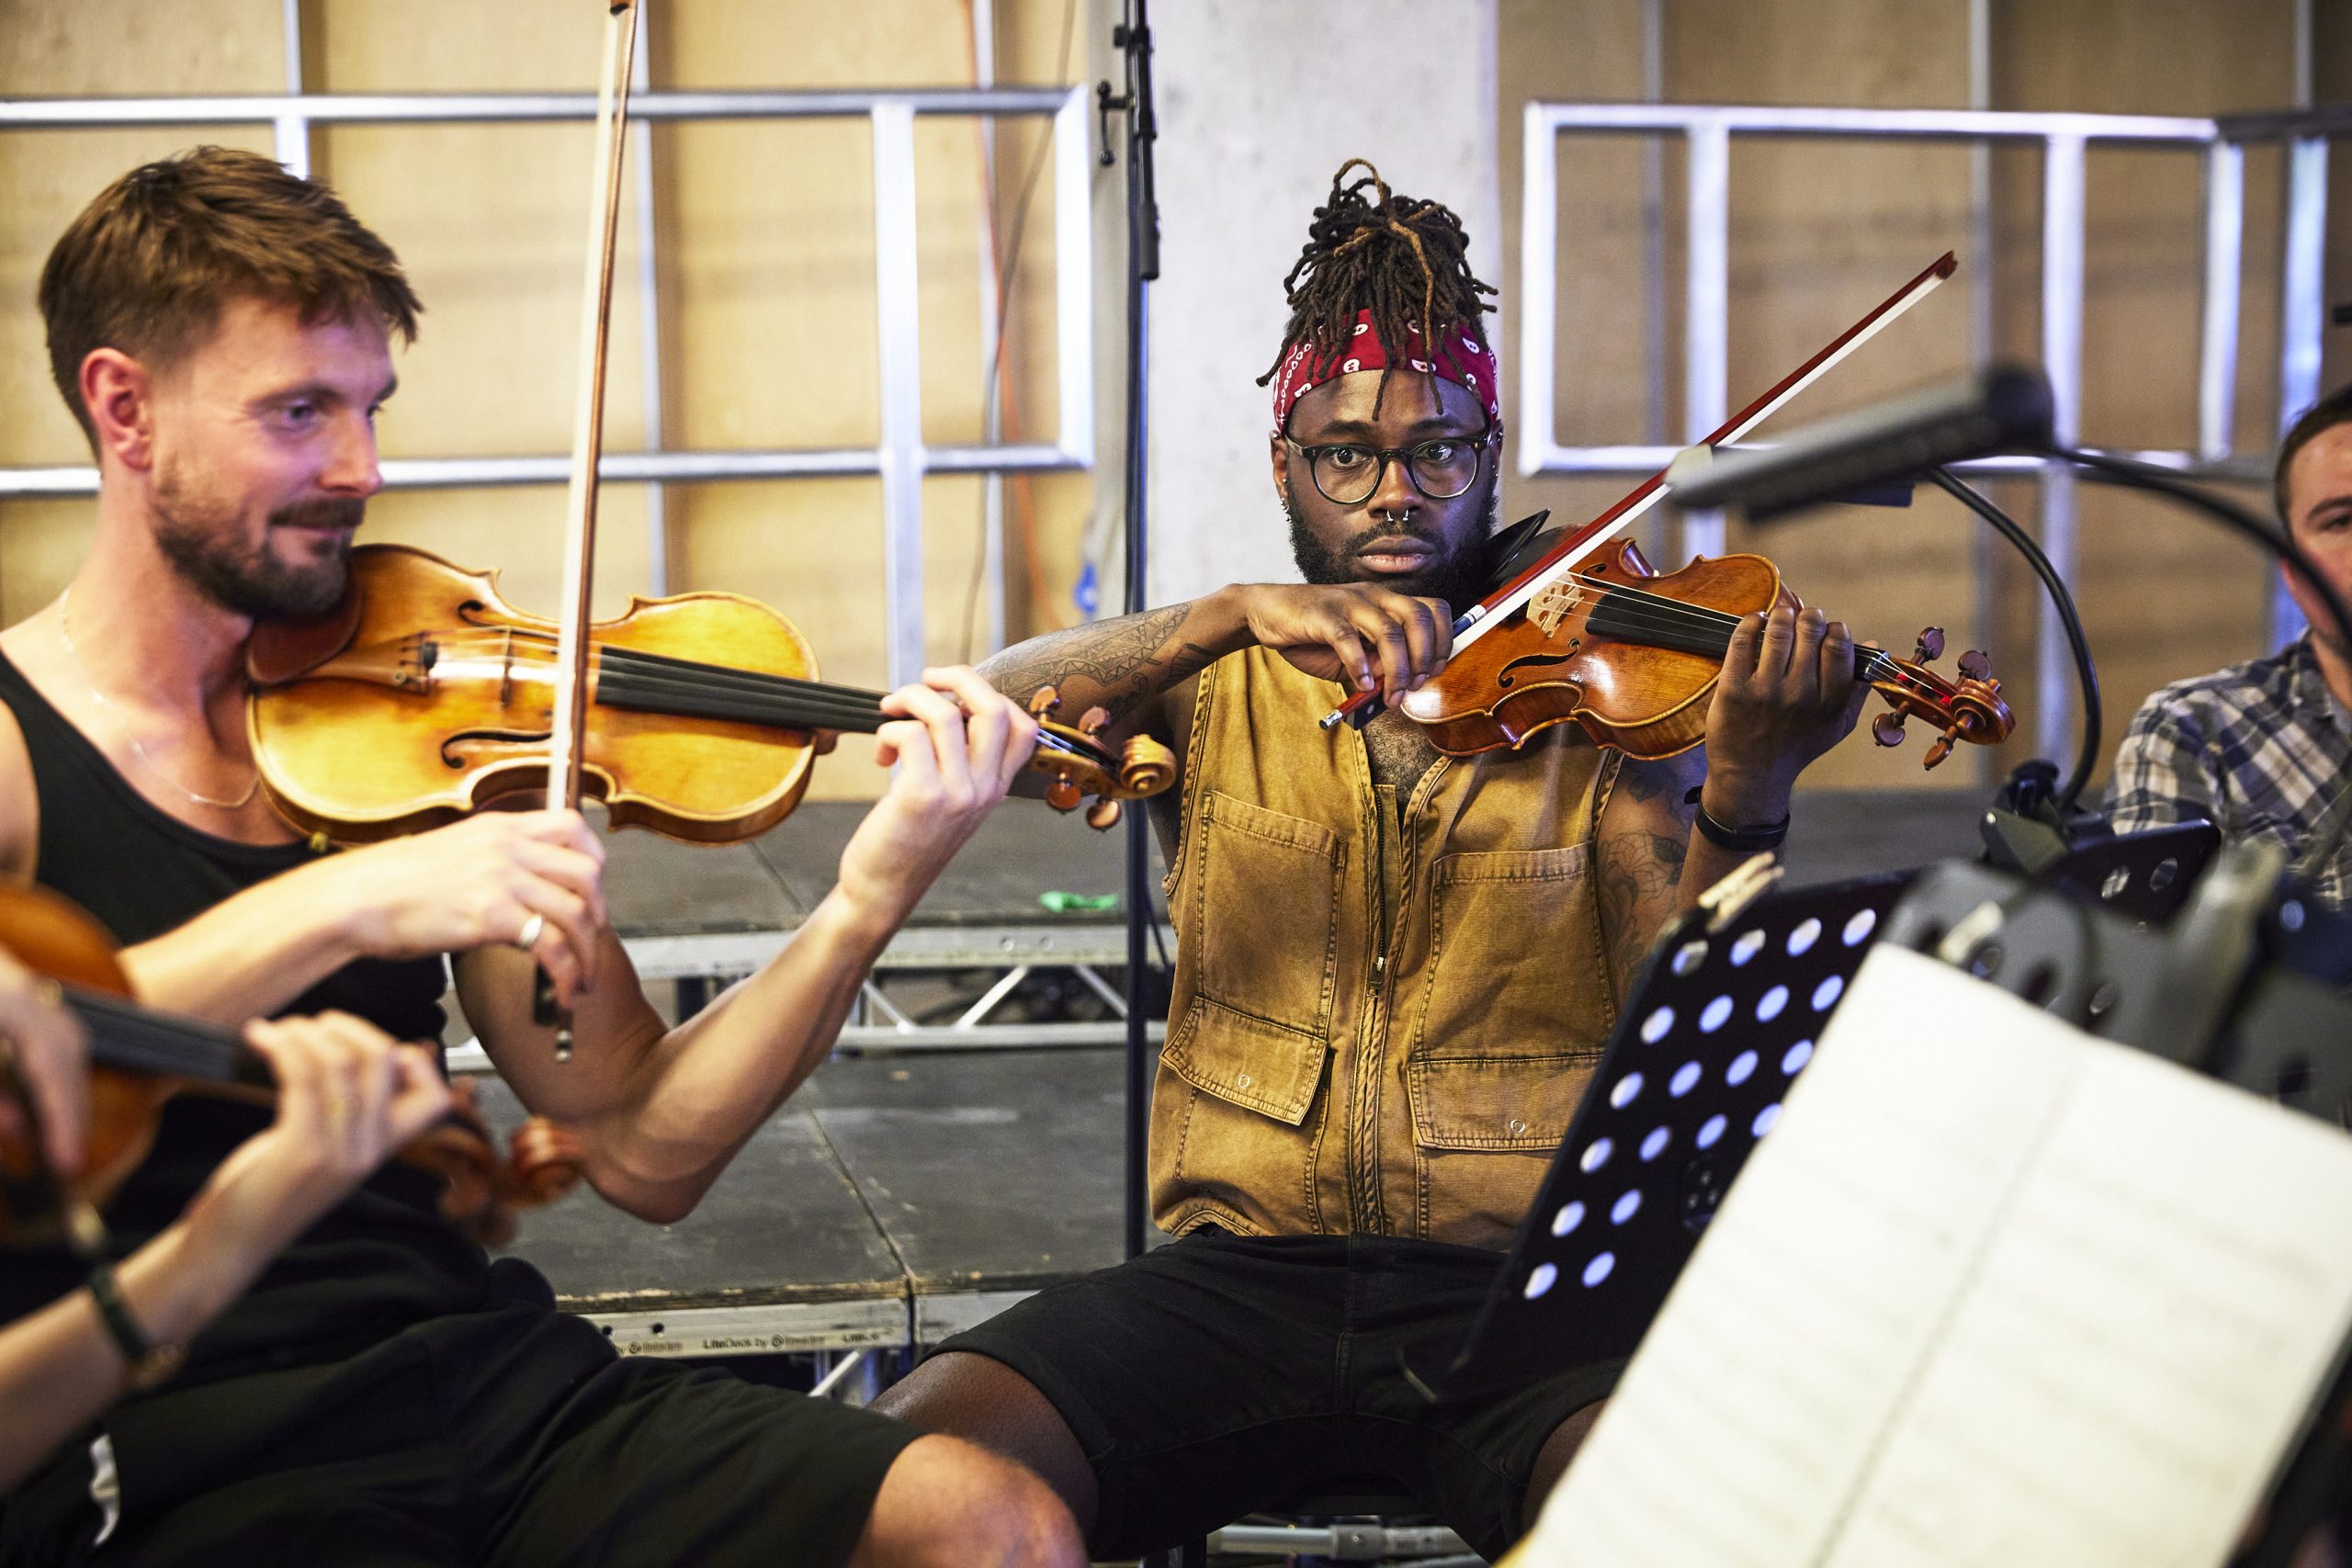 The Multi-Story Orchestra: The Open Fund For Organisations